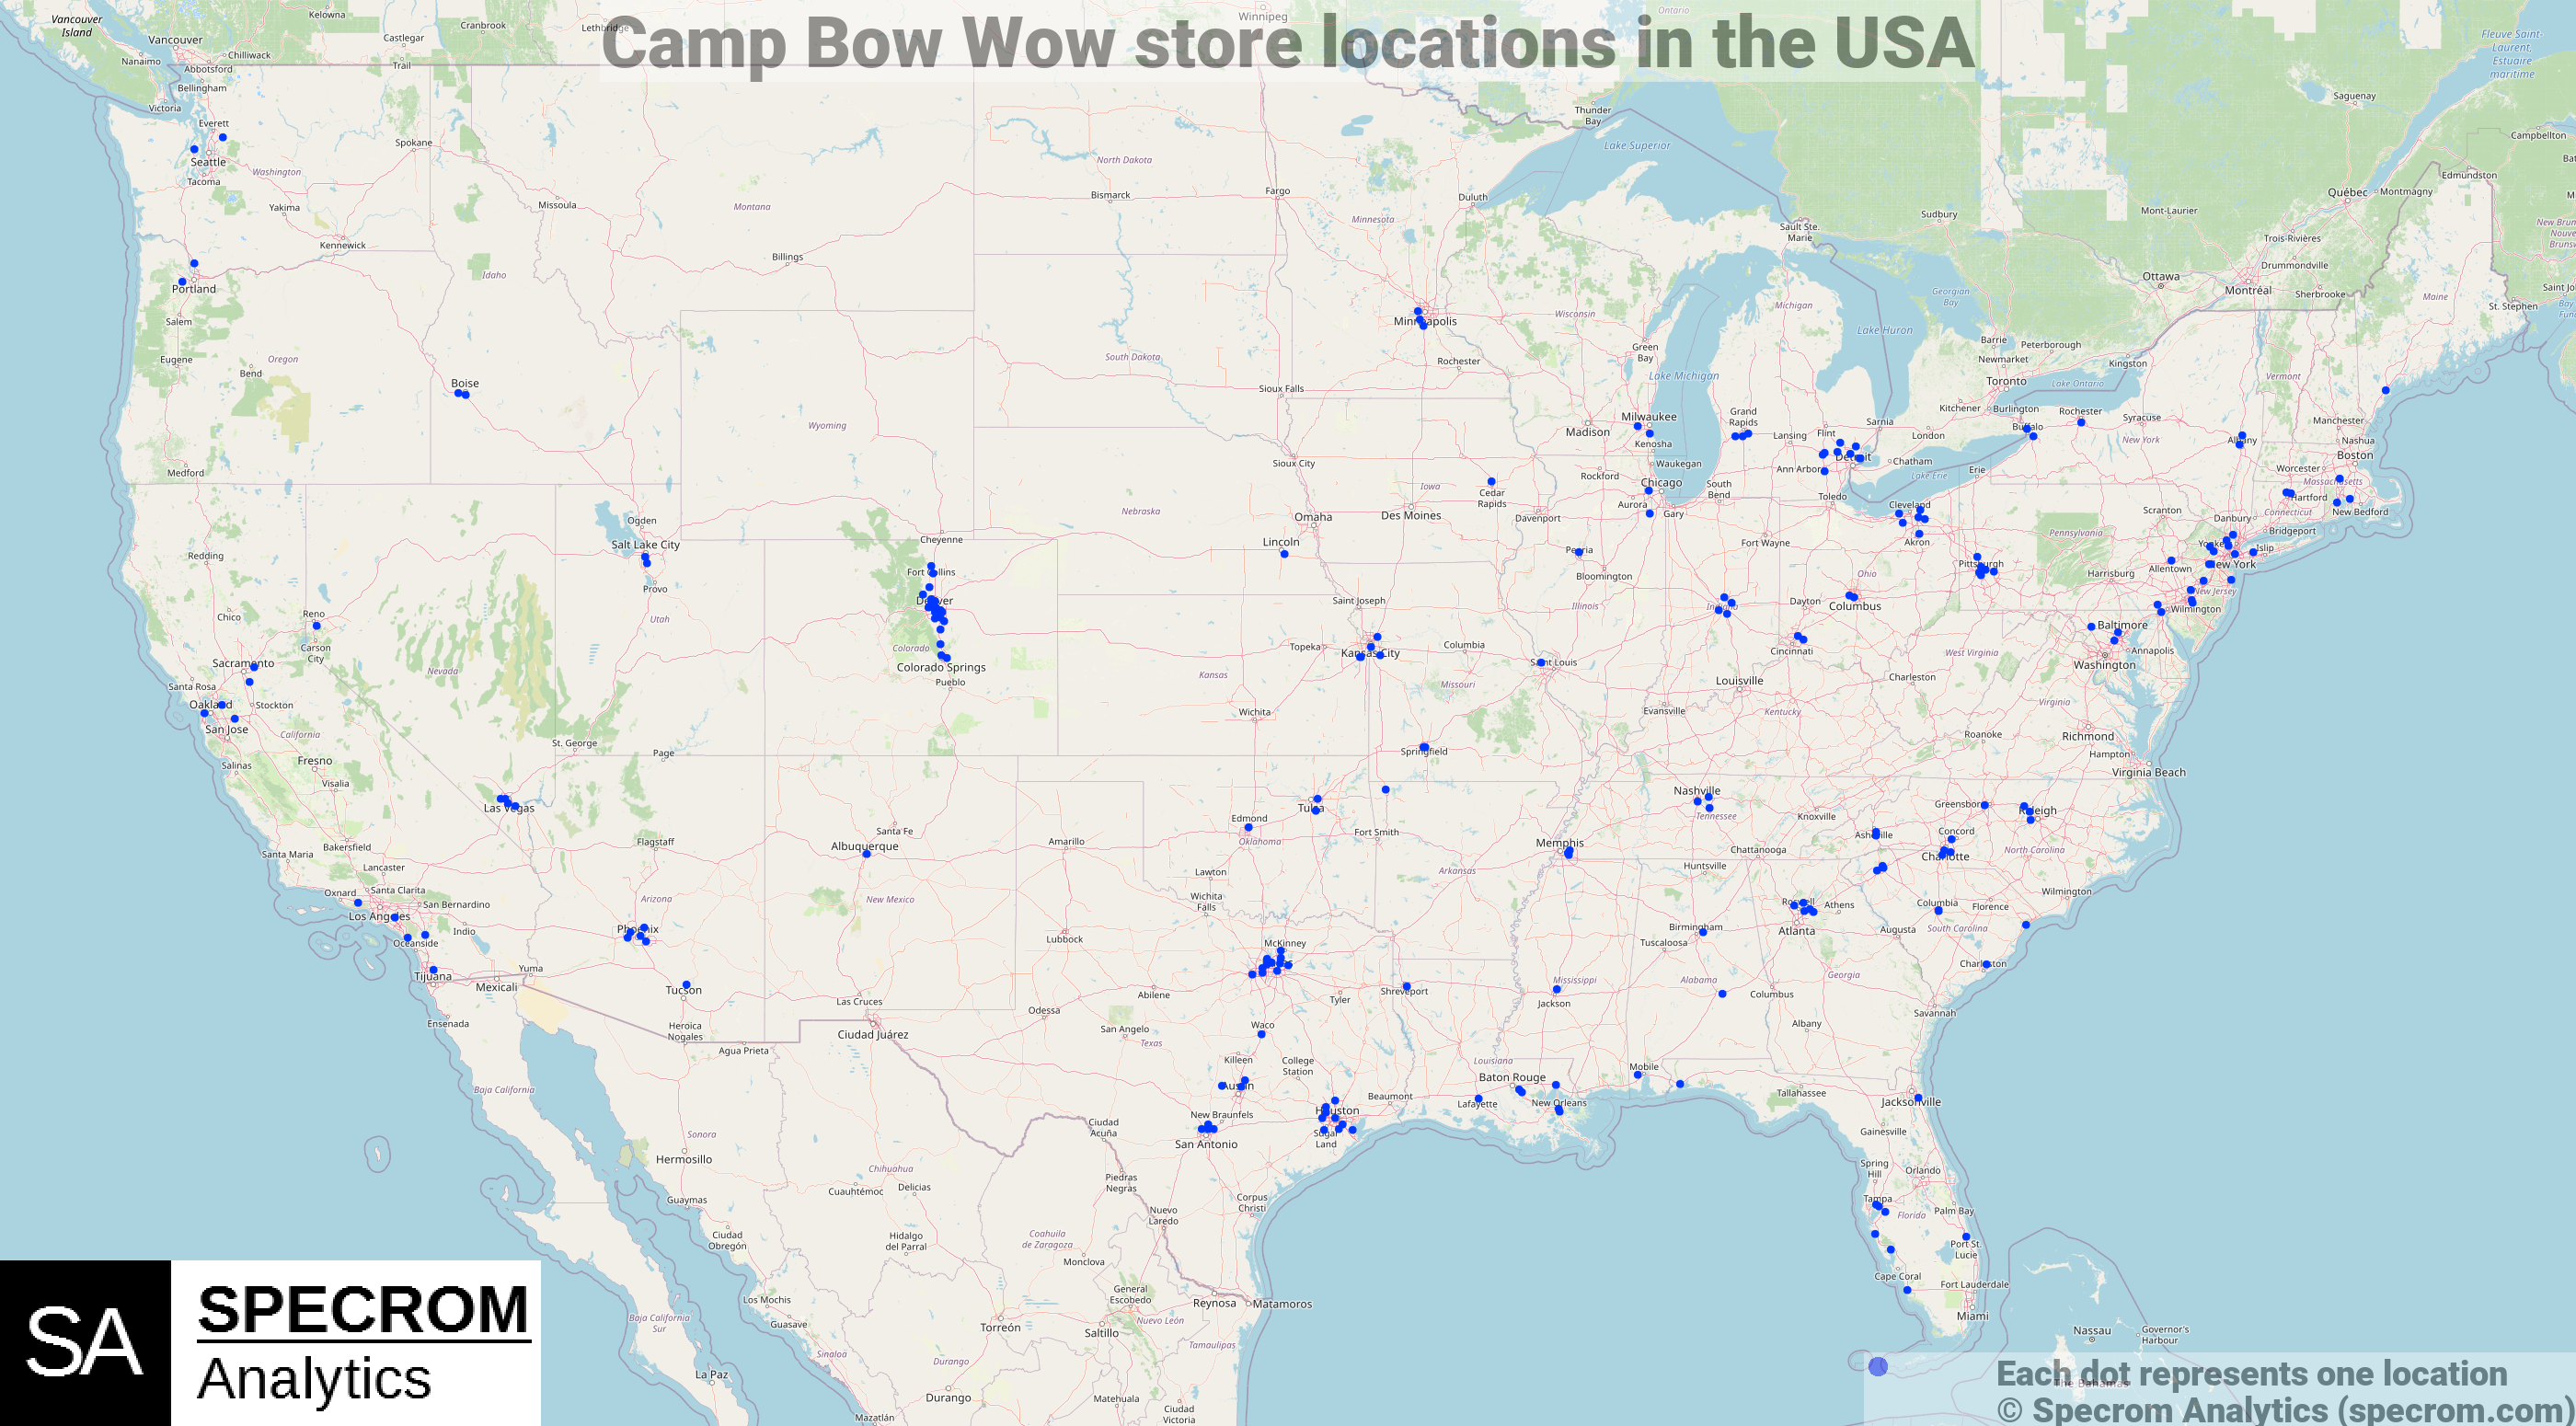 Camp Bow Wow store locations in the USA